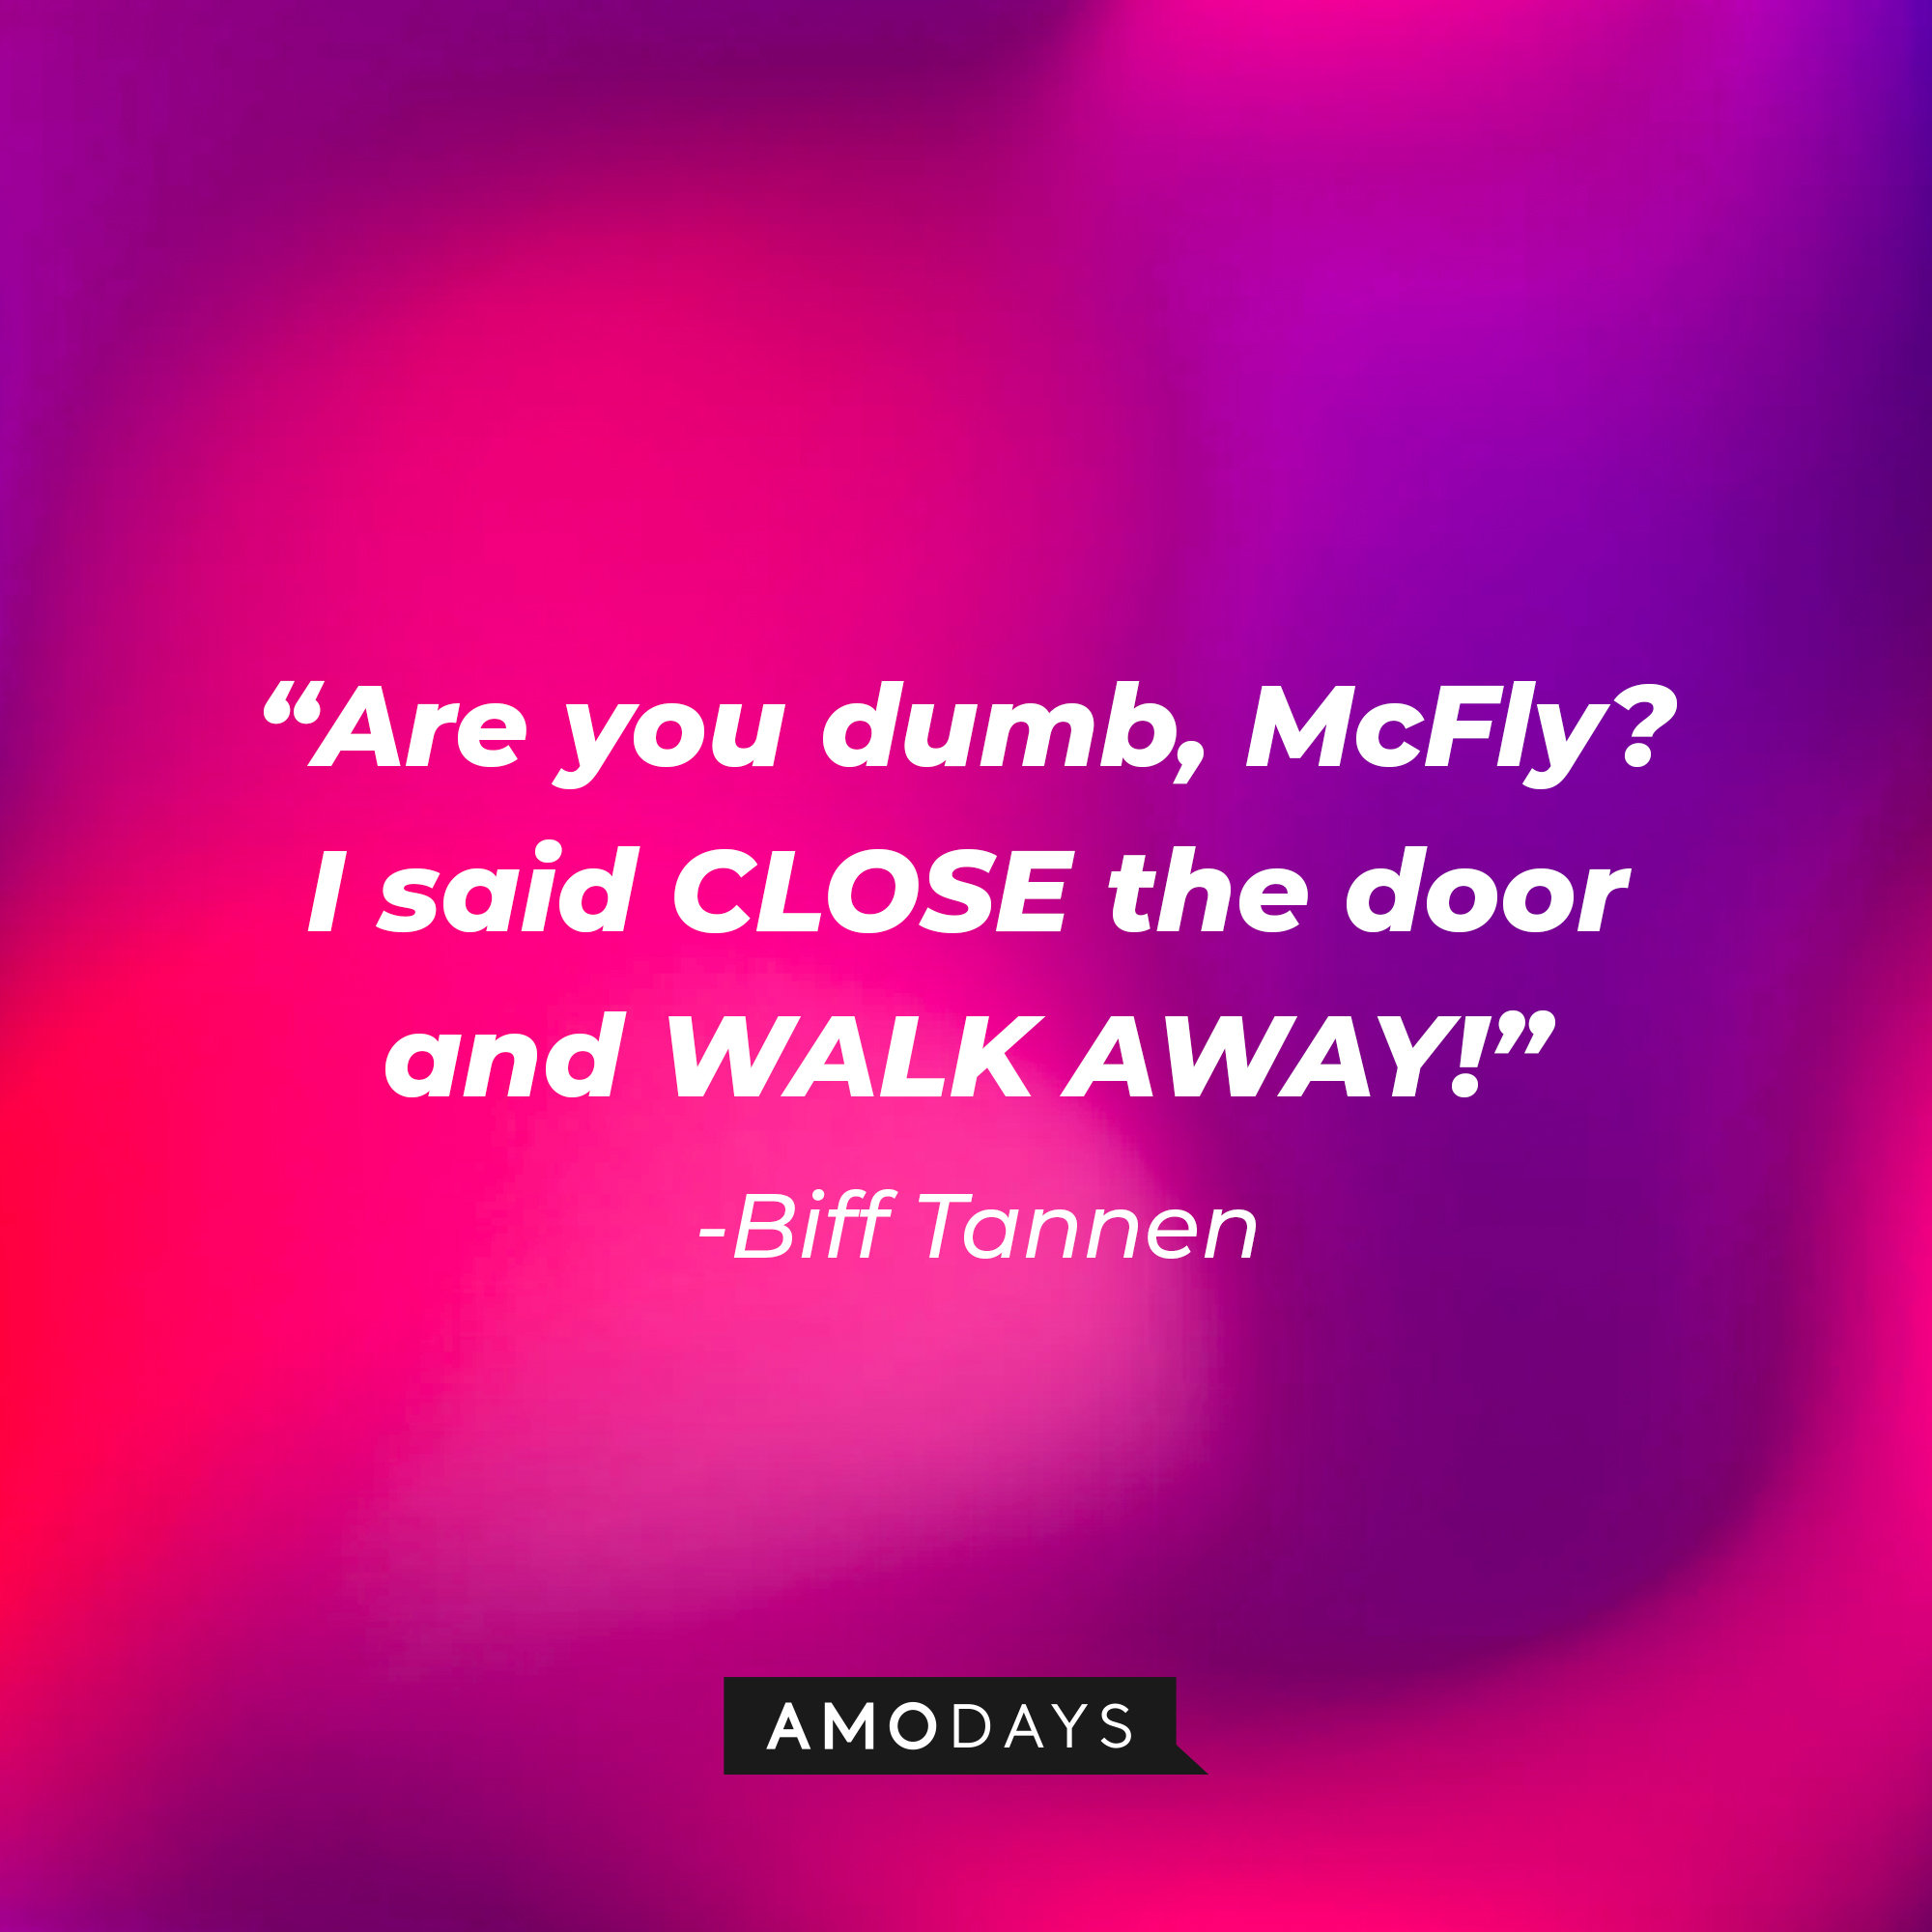 Biff Tannen’s quote: “Are you dumb, McFly? I said CLOSE the door and WALK AWAY!” | Source: AmoDays